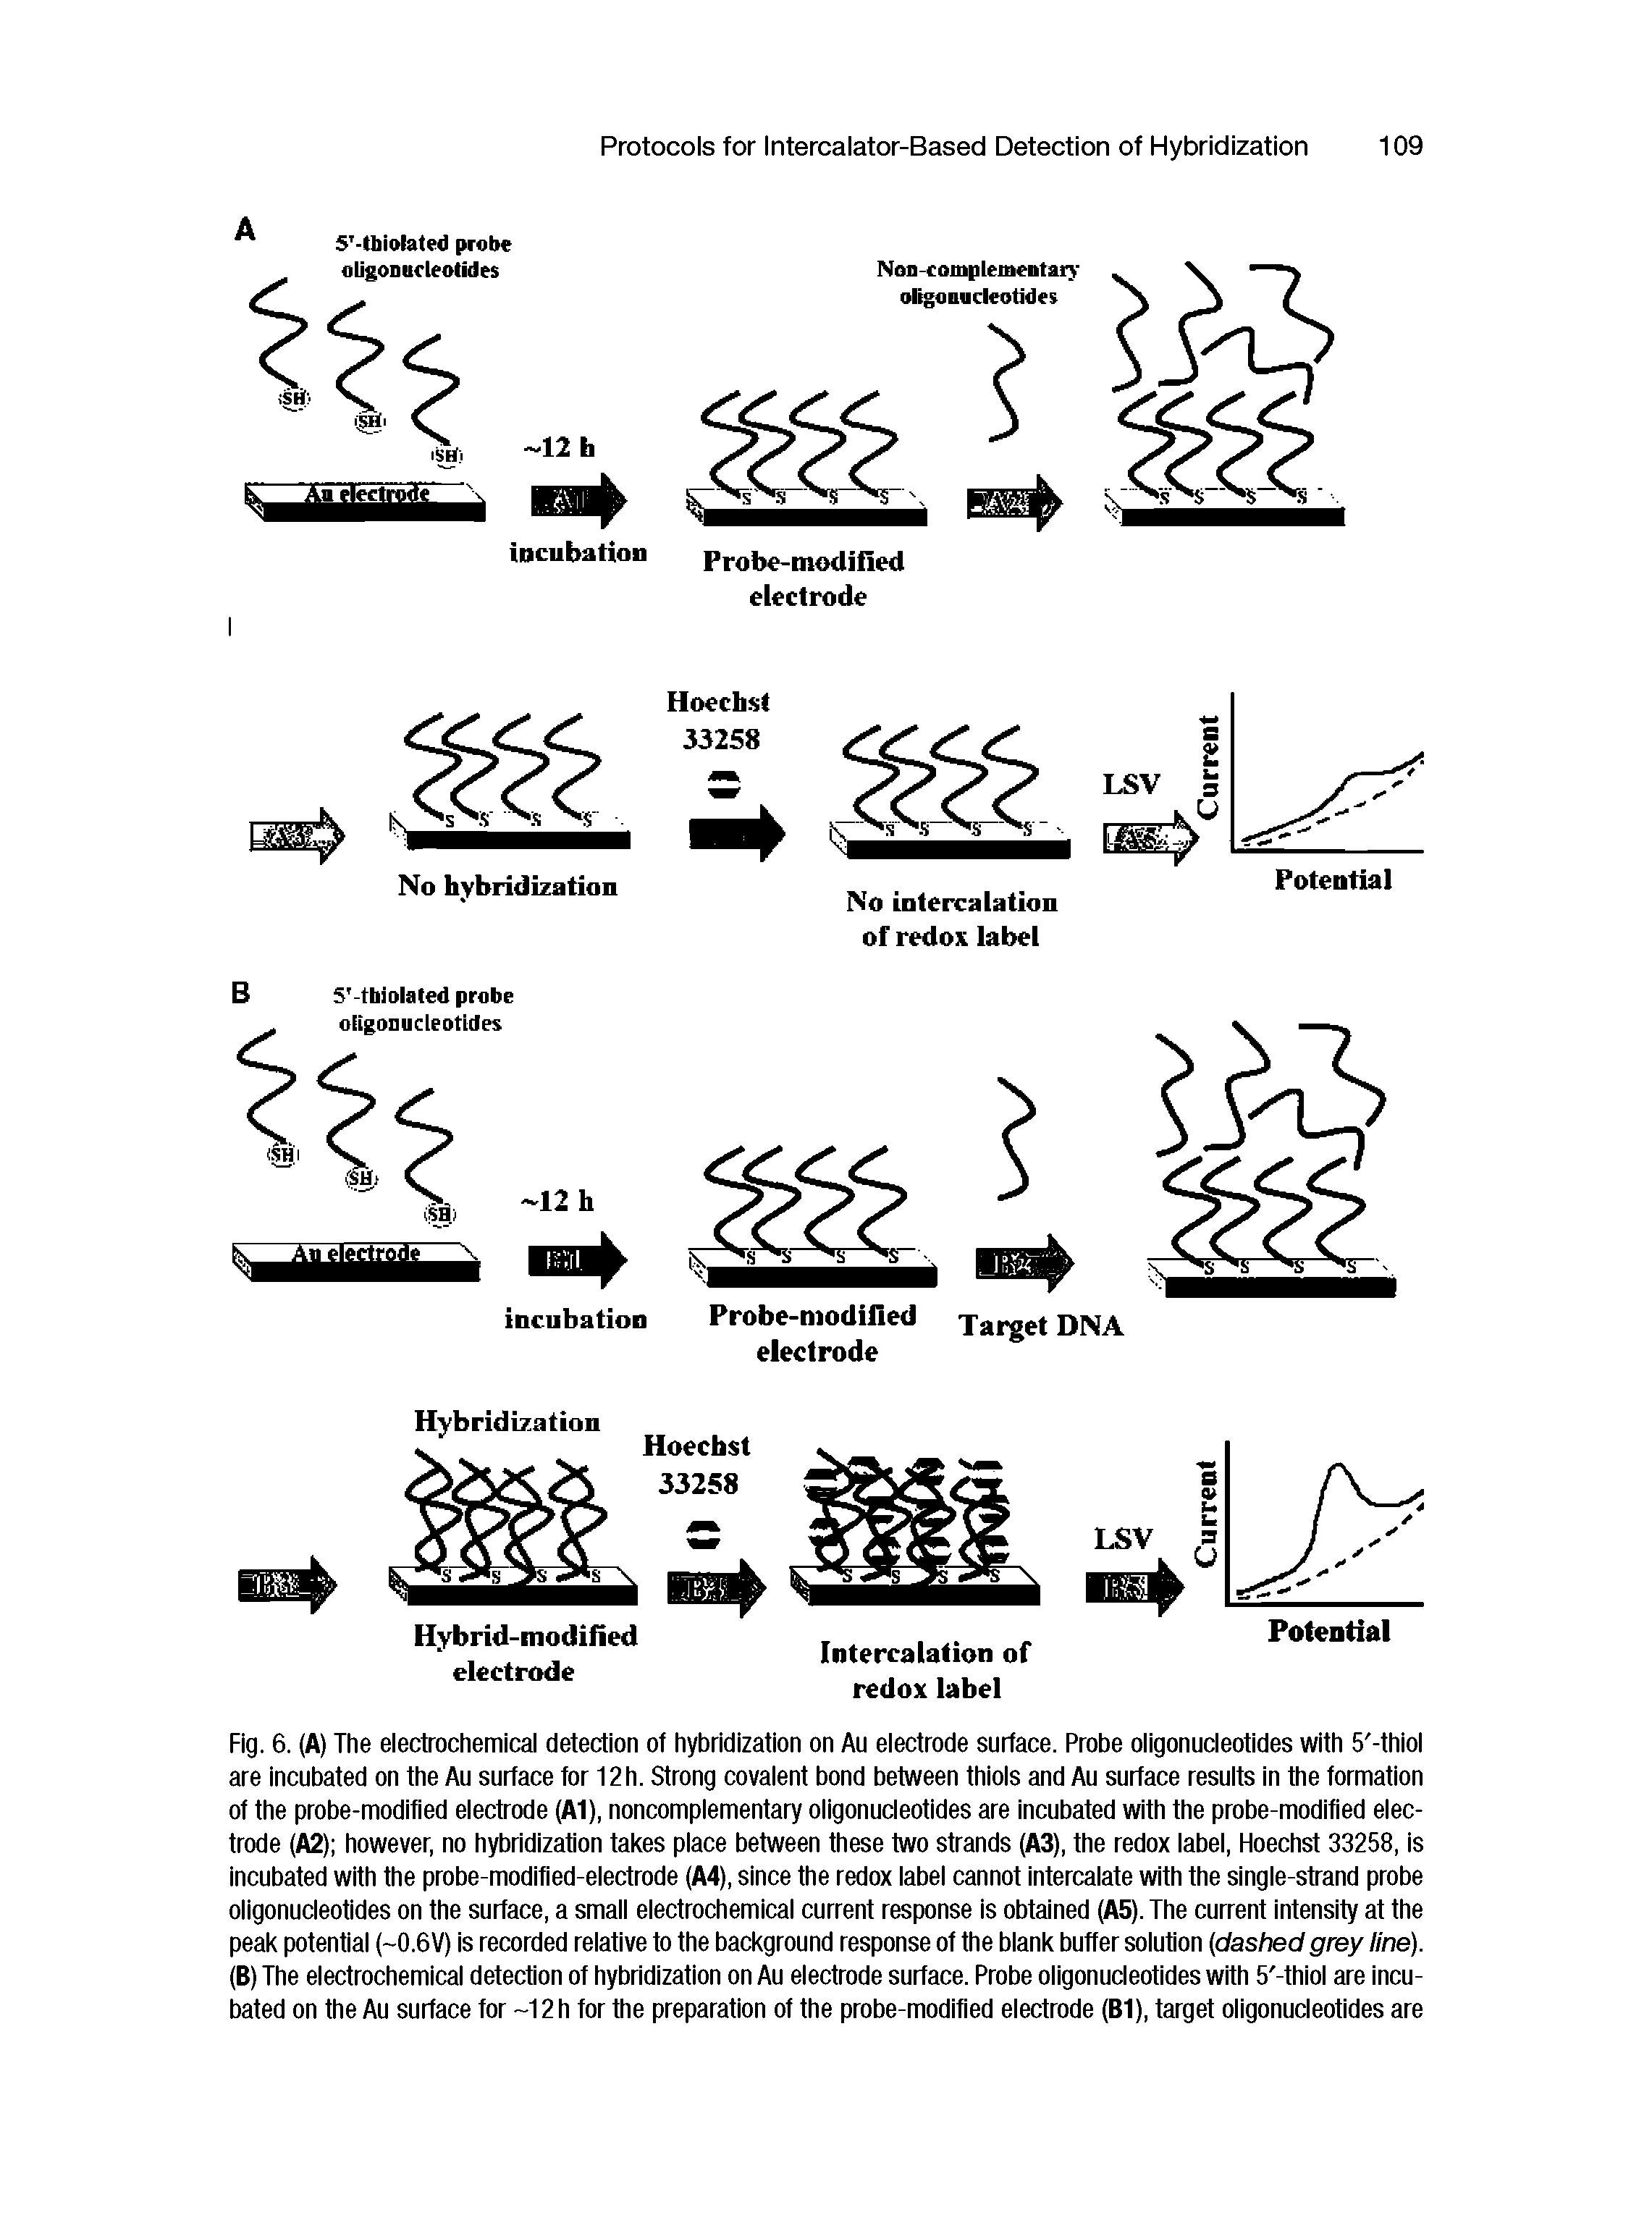 Fig. 6. (A) The electrochemical detection of hybridization on Au electrode surface. Probe oligonucleotides with 5 -thiol are incubated on the Au surface for 12h. Strong covalent bond between thiols and Au surface results in the formation of the probe-modified electrode (A1), noncomplementary oligonucleotides are incubated with the probe-modified electrode (A2) however, no hybridization takes place between these two strands (A3), the redox label, Hoechst 33258, is incubated with the probe-modified-electrode (A4), since the redox label cannot intercalate with the single-strand probe oligonucleotides on the surface, a small electrochemical current response is obtained (A5). The current intensity at the peak potential (-0.6V) is recorded relative to the background response of the blank buffer solution (dashed grey line). (B) The electrochemical detection of hybridization on Au electrode surface. Probe oligonucleotides with 5 -thiol are incubated on the Au surface for -12 h for the preparation of the probe-modified electrode (B1), target oligonucleotides are...